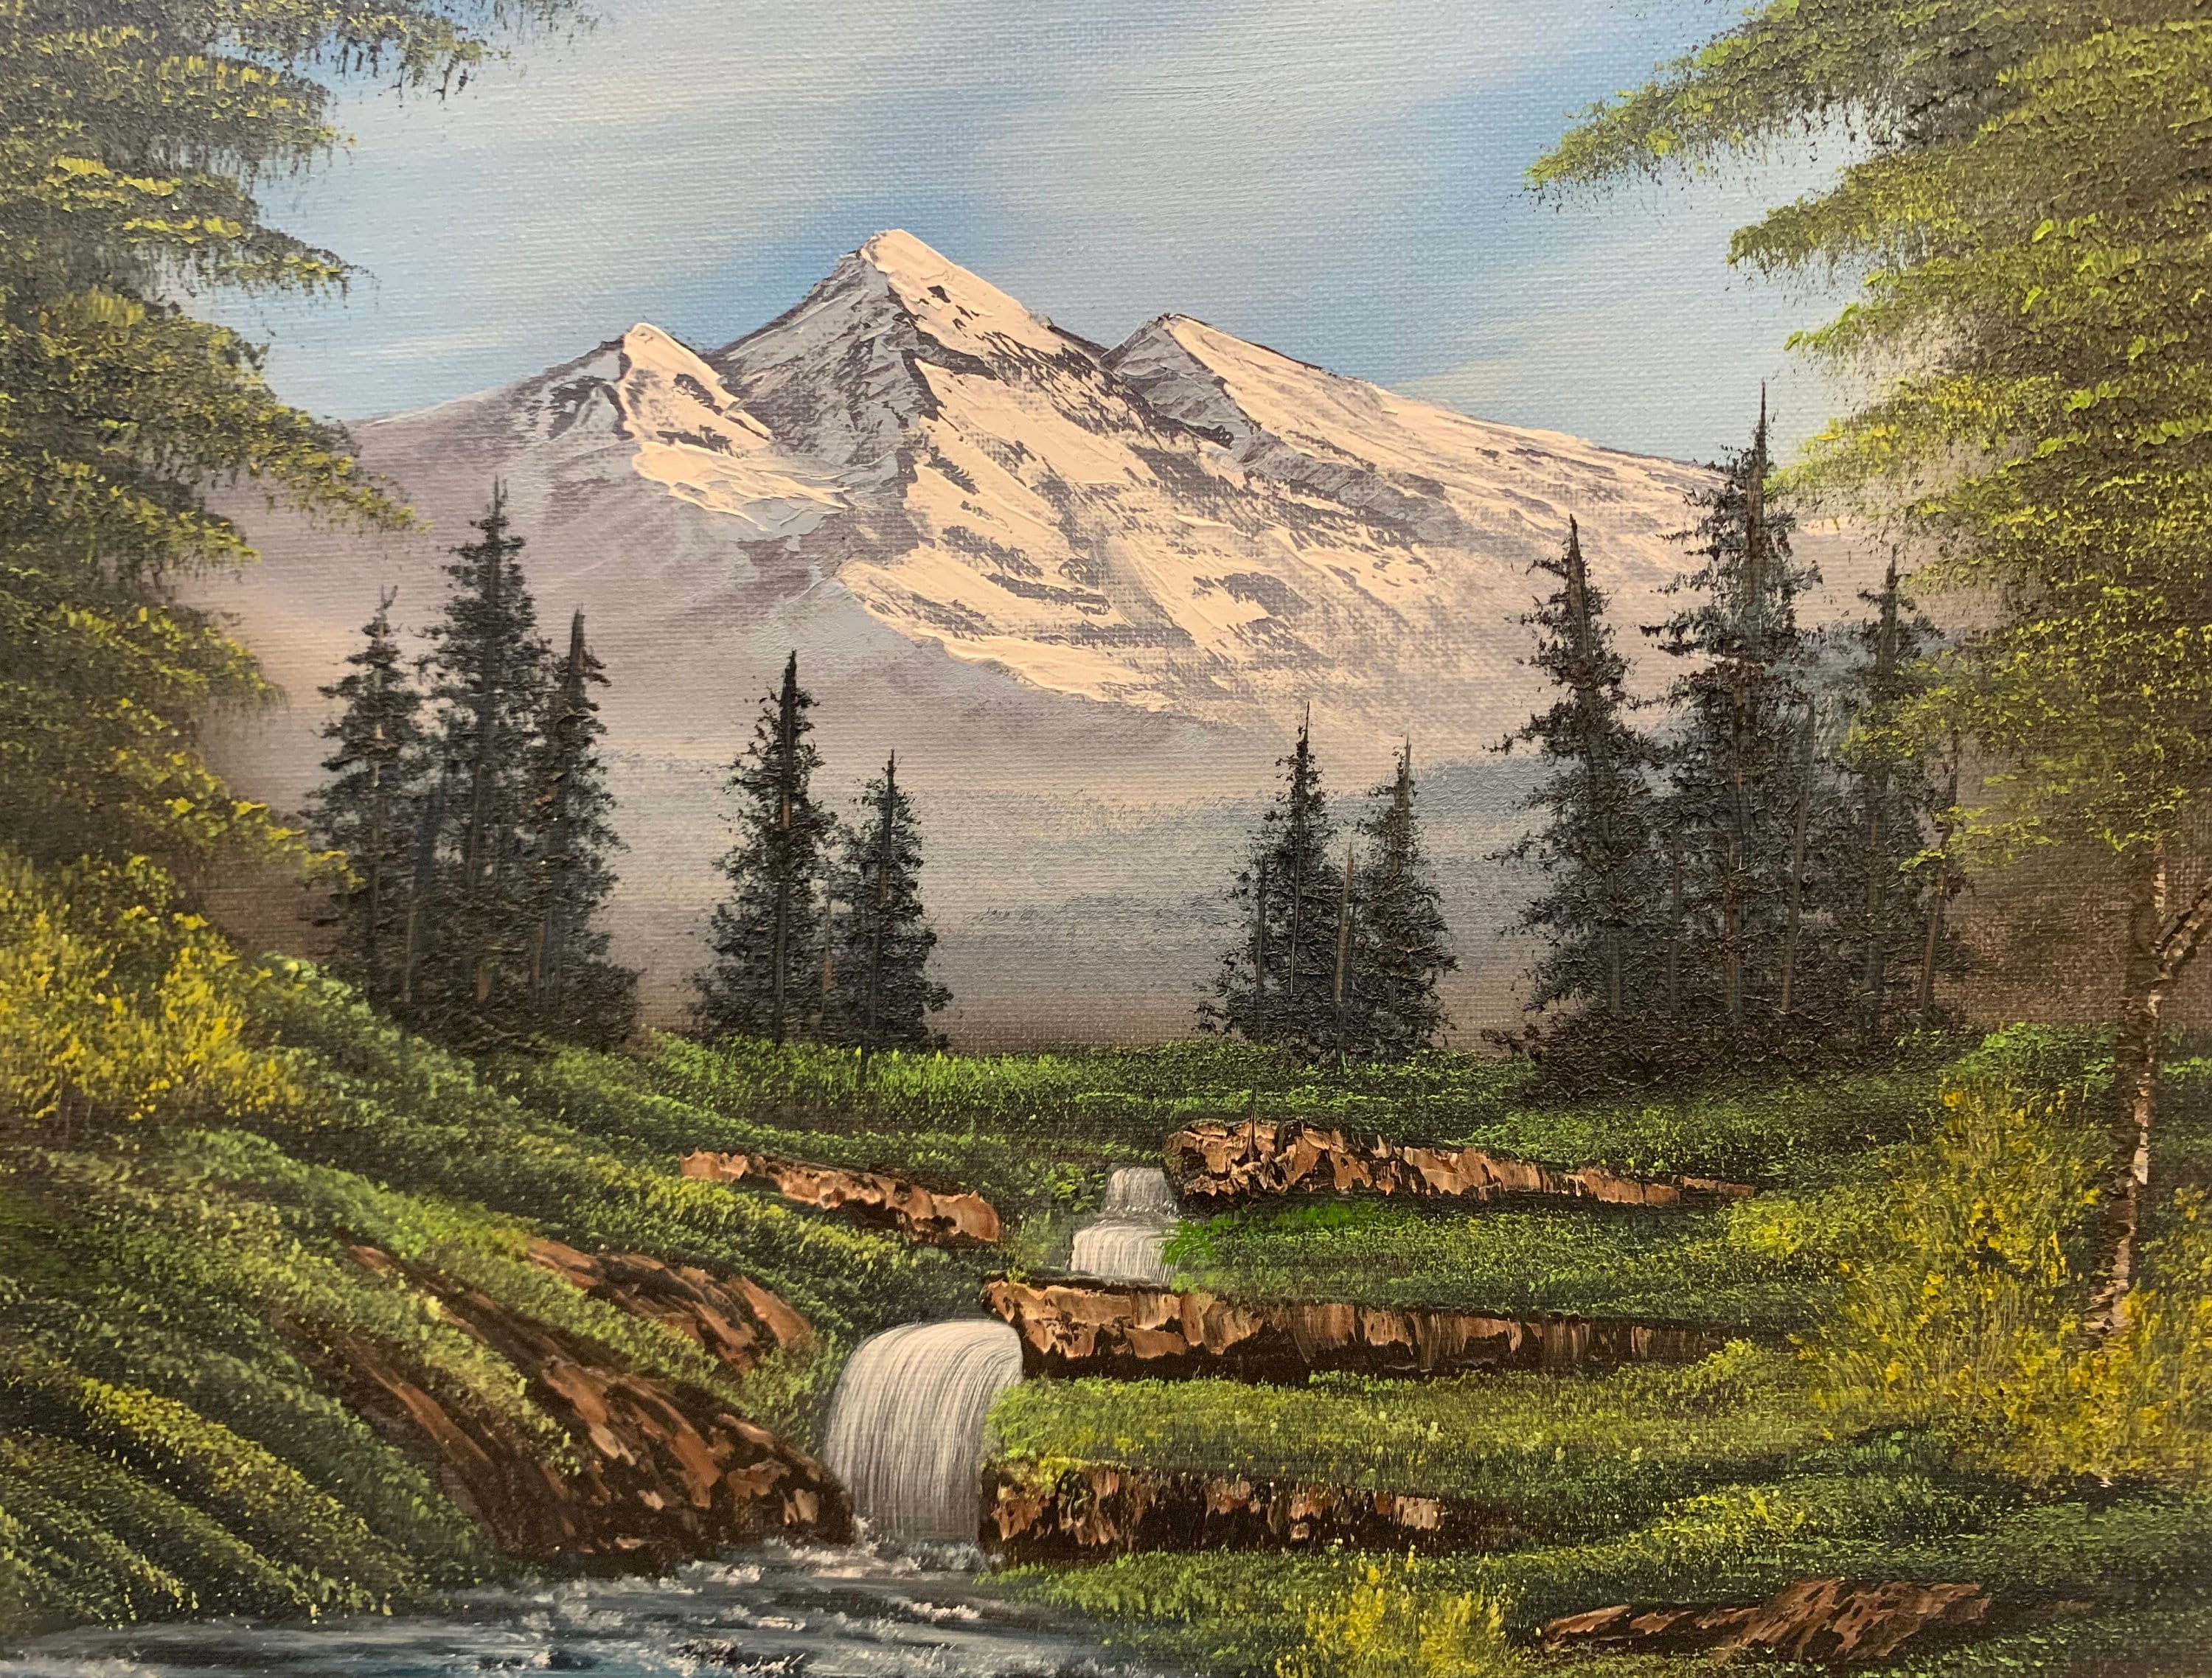 Bob Ross Inspired Painting - Island in the Wilderness Tapestry